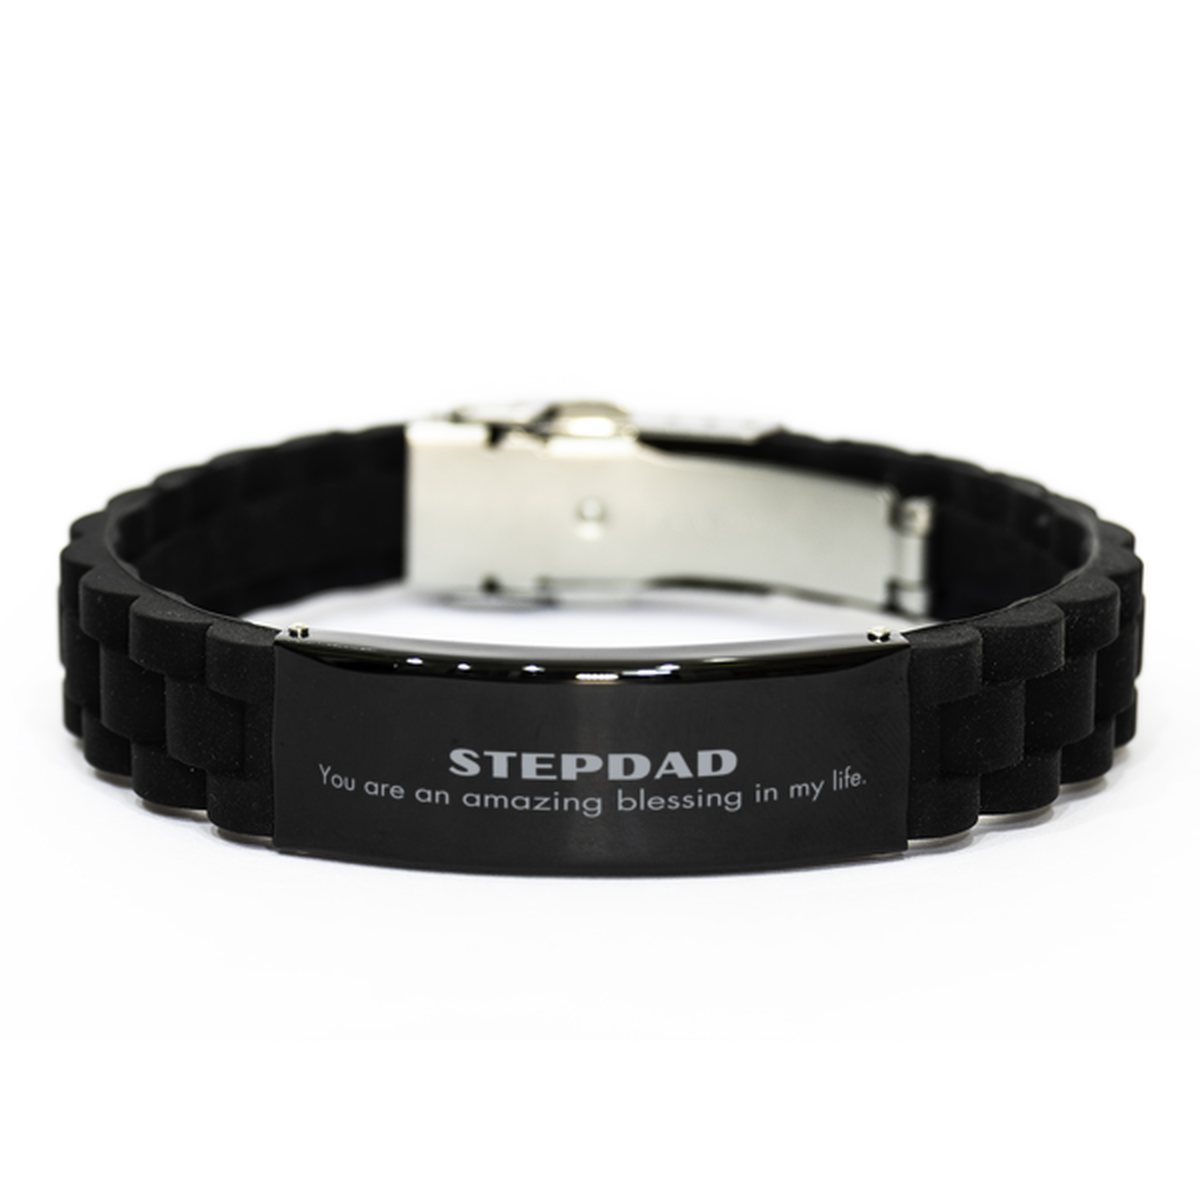 Stepdad Black Glidelock Clasp Bracelet, You are an amazing blessing in my life, Thank You Gifts For Stepdad, Inspirational Birthday Christmas Unique Gifts For Stepdad